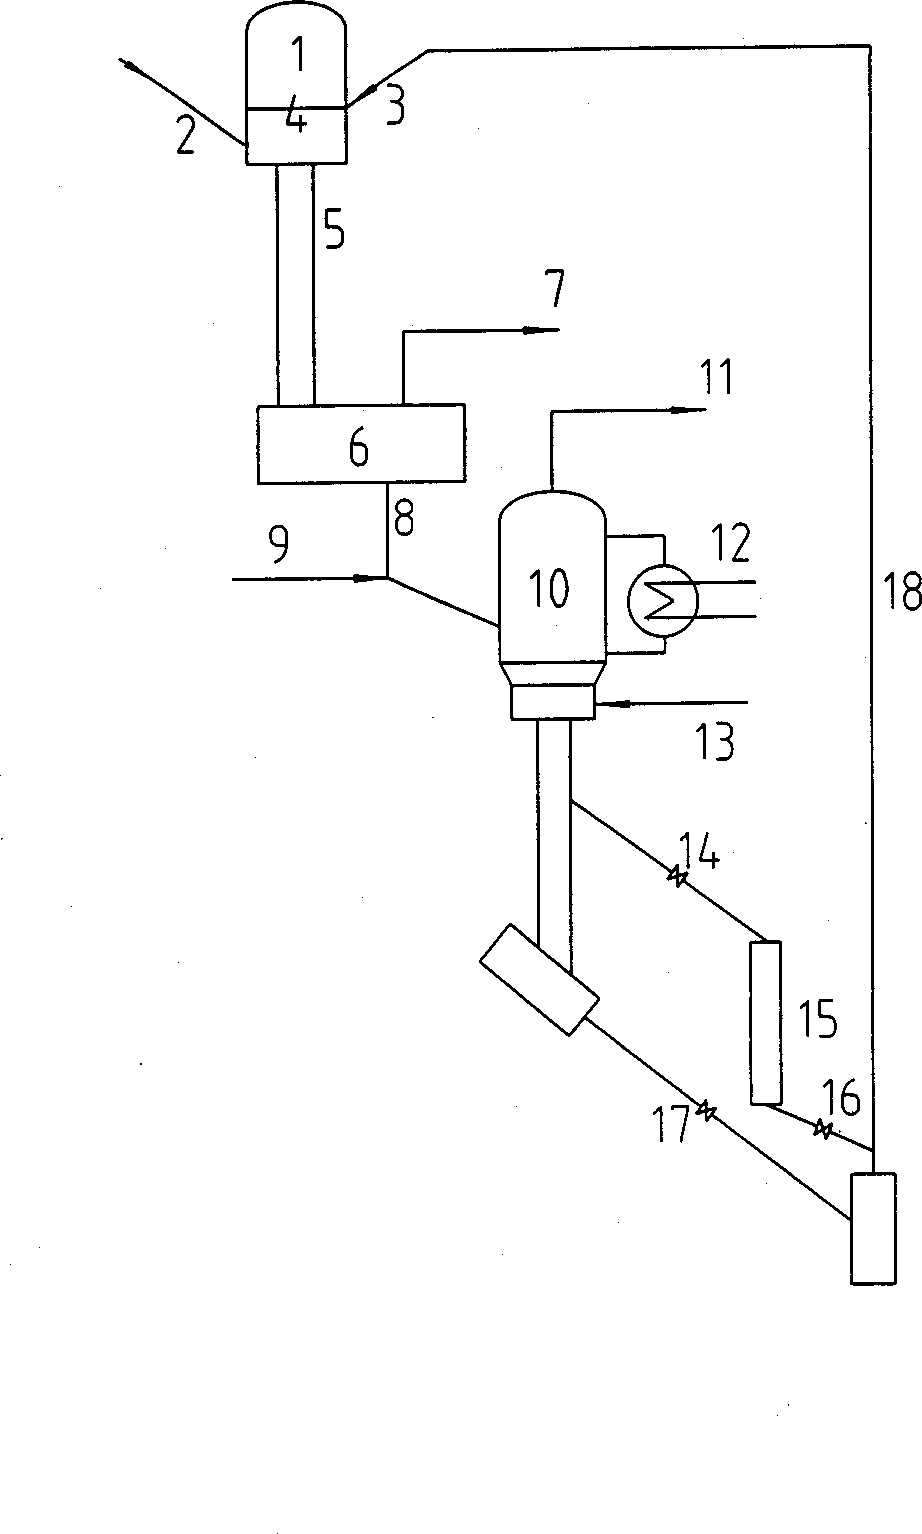 Process and system for preparing low-carbon olefin from methanol or dimethylether